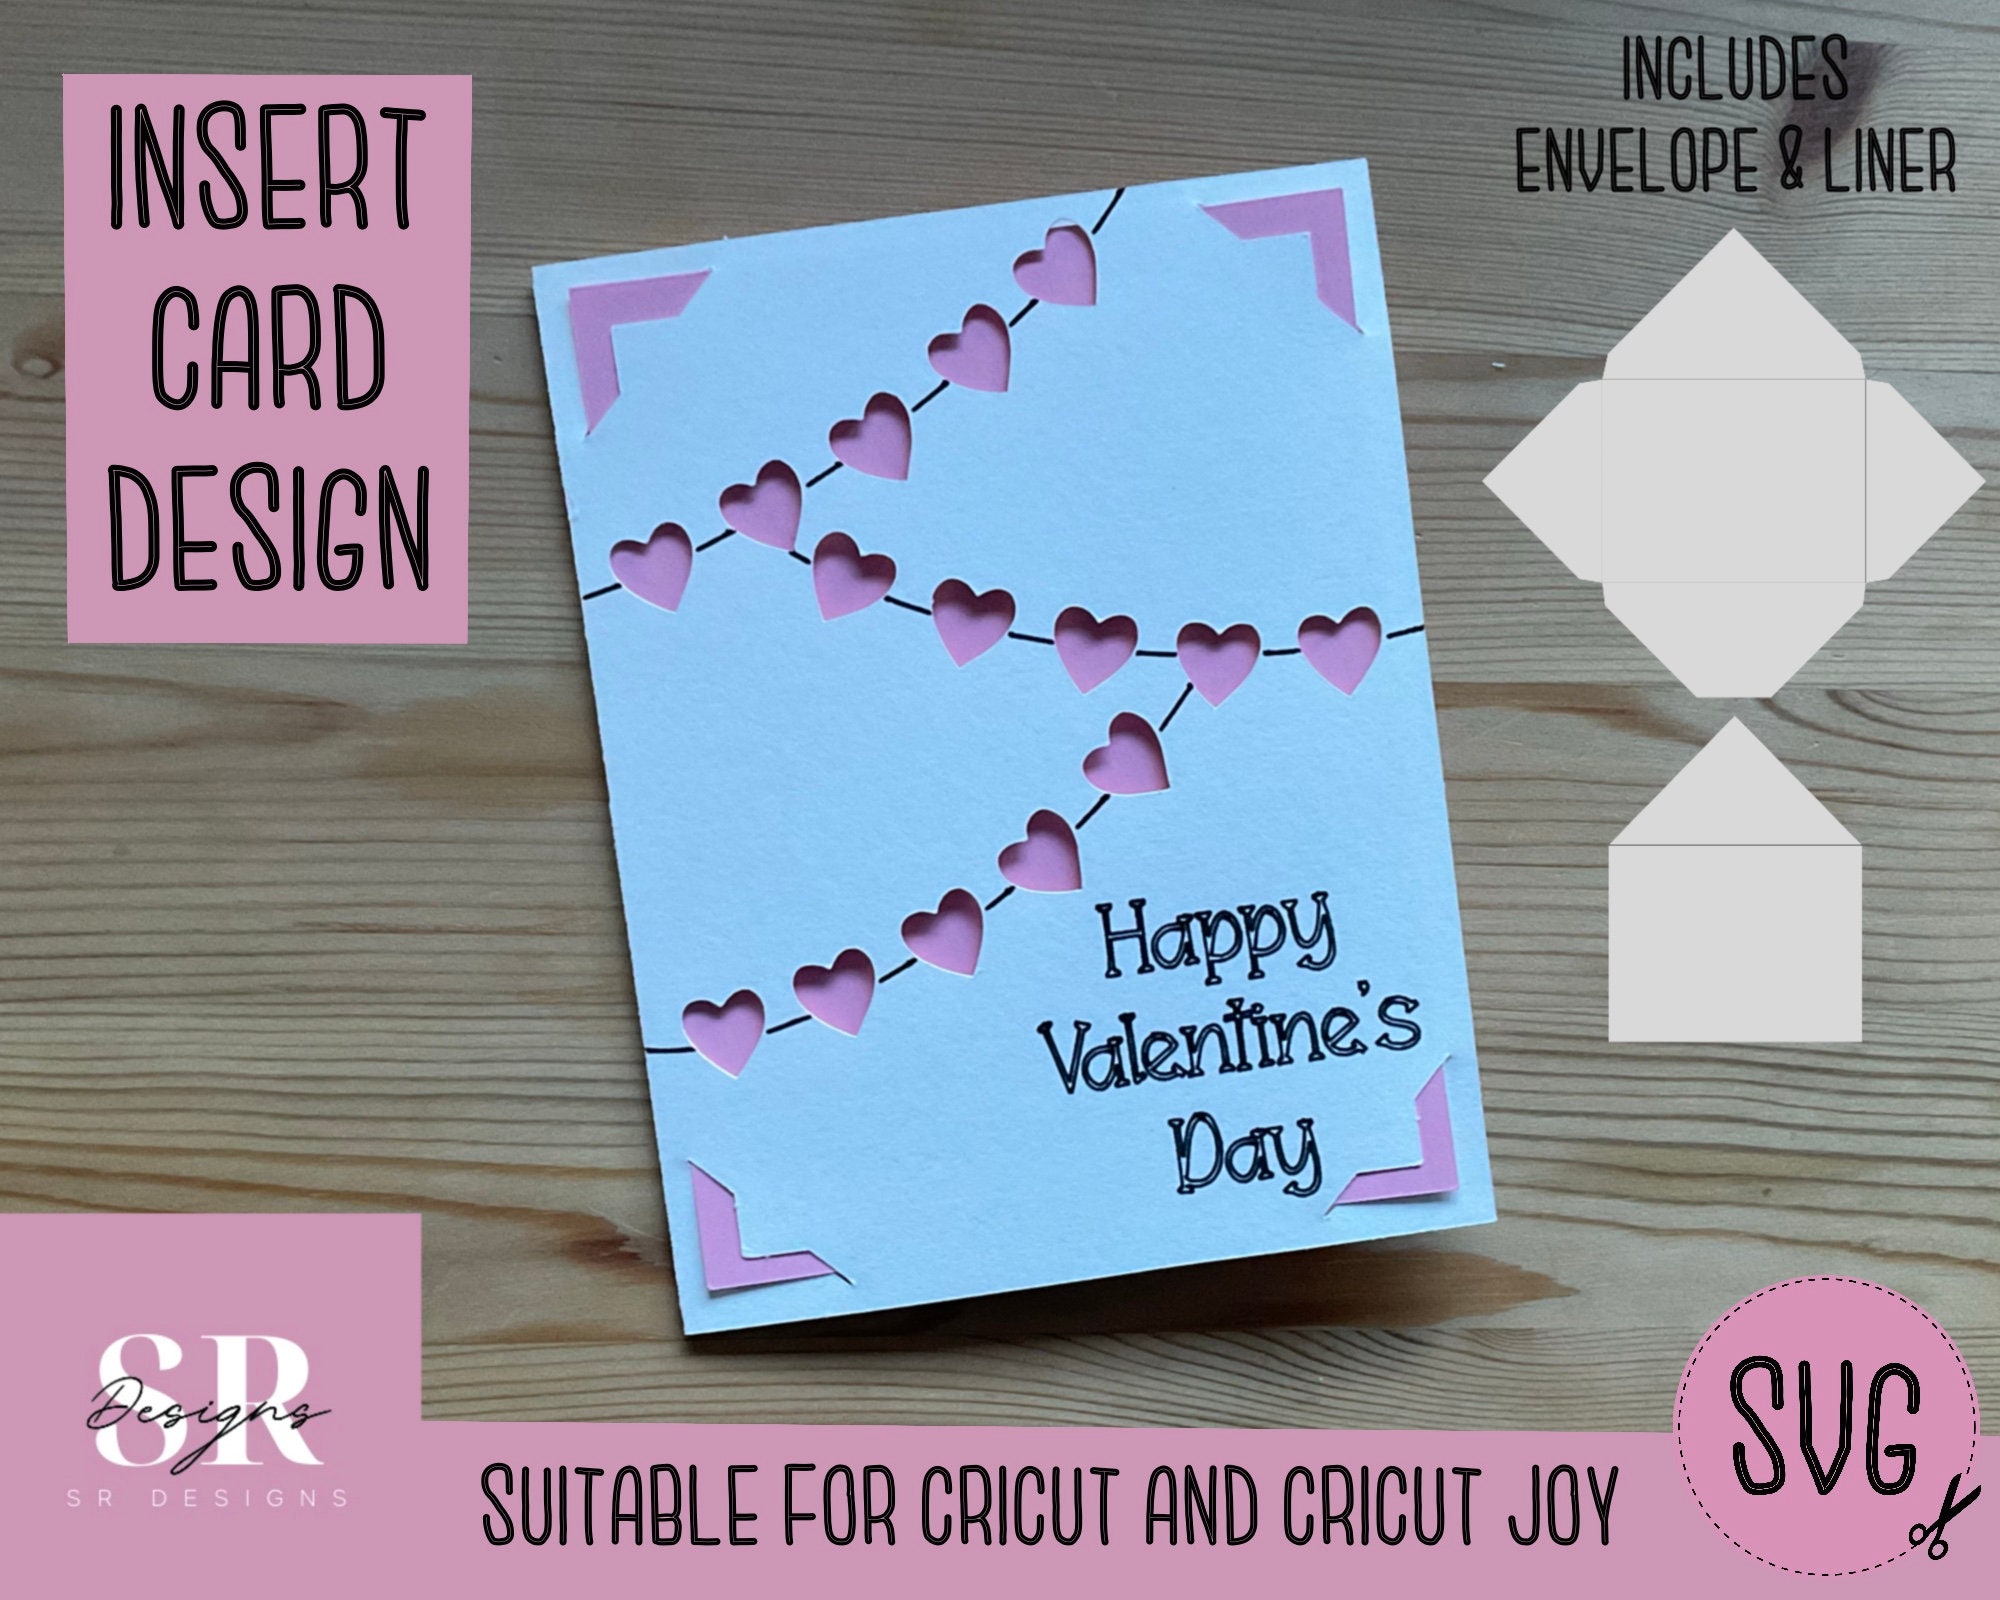 SVG: Valentines Day Insert Card. Cricut Joy Friendly. Draw and Cut Card  Design. Envelope Template Included. Cricut Joy Valentines Card SVG 